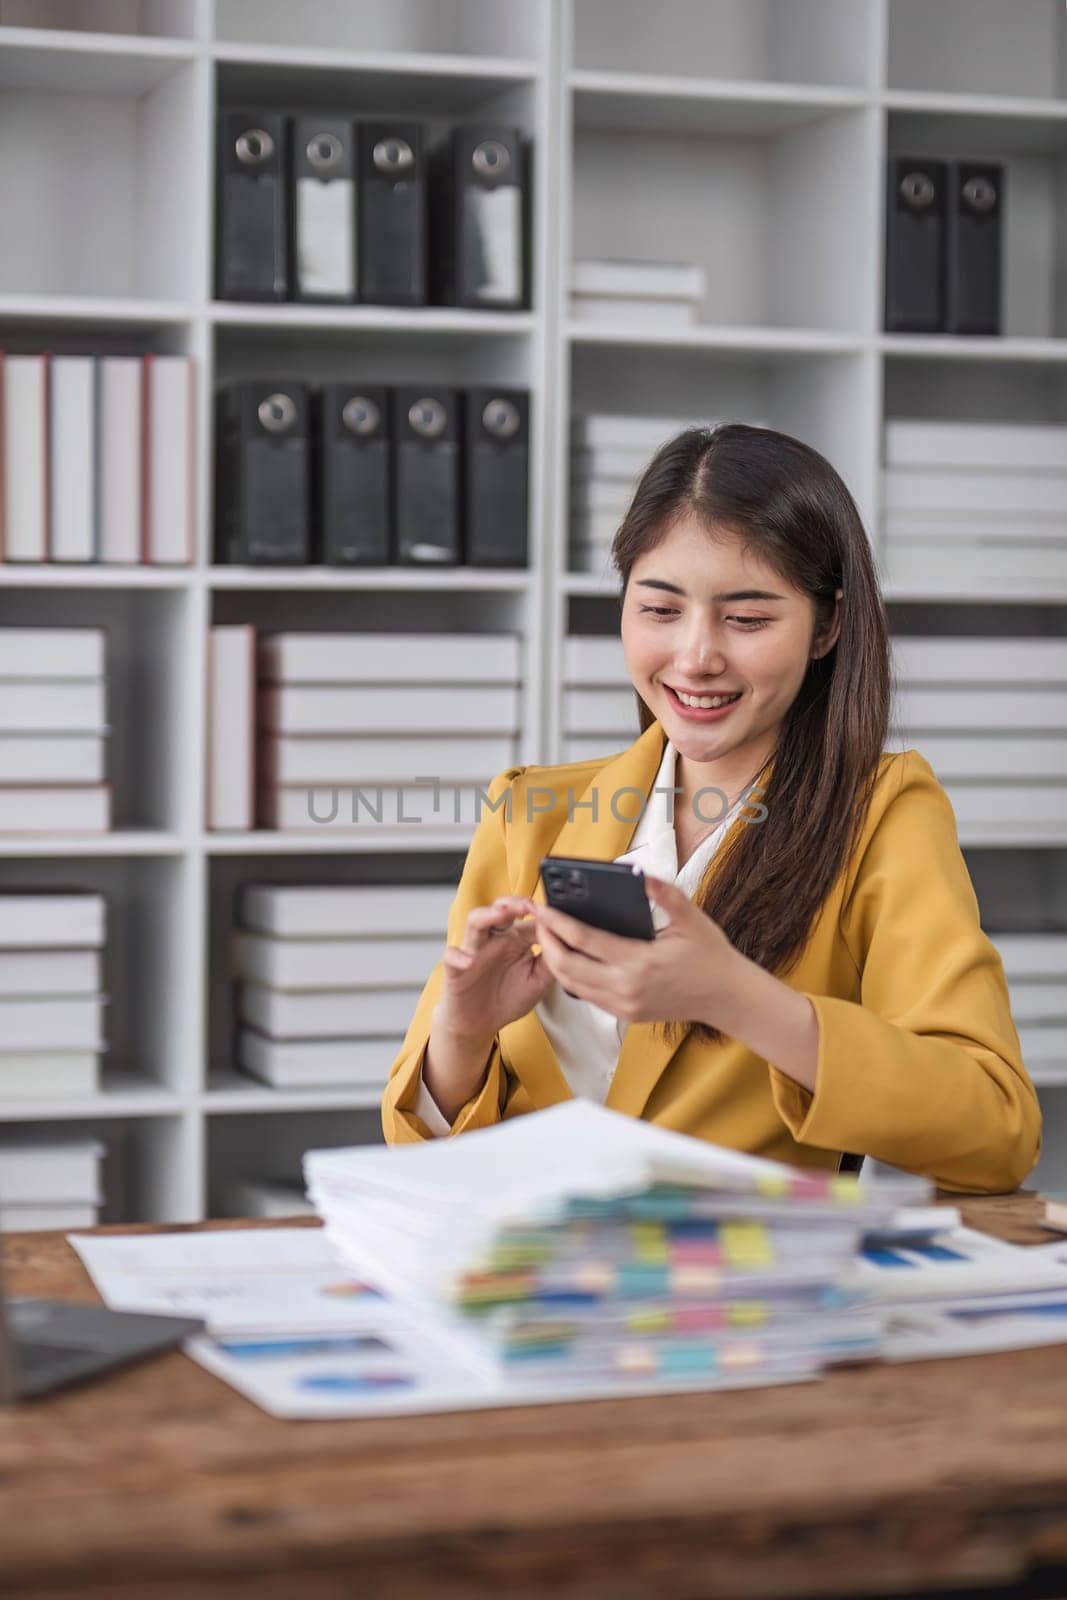 Portrait smile beautiful business asian designer woman with yellow suit working office desk using phone computer. Small business employee freelance online sme marketing e-commerce telemarketing